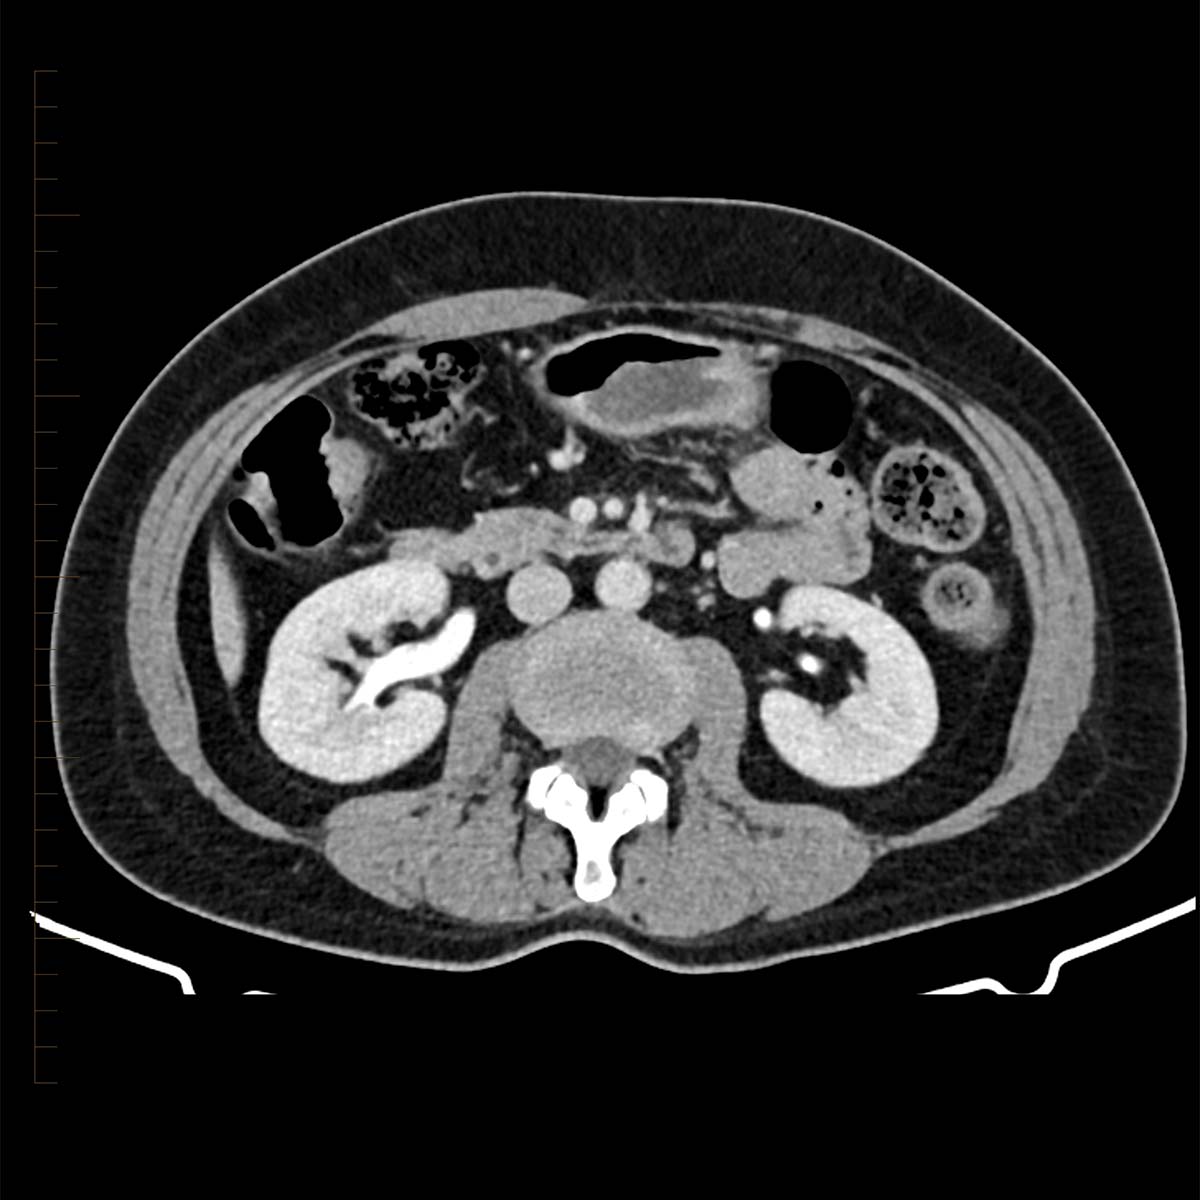 a CT scan image of a kidney